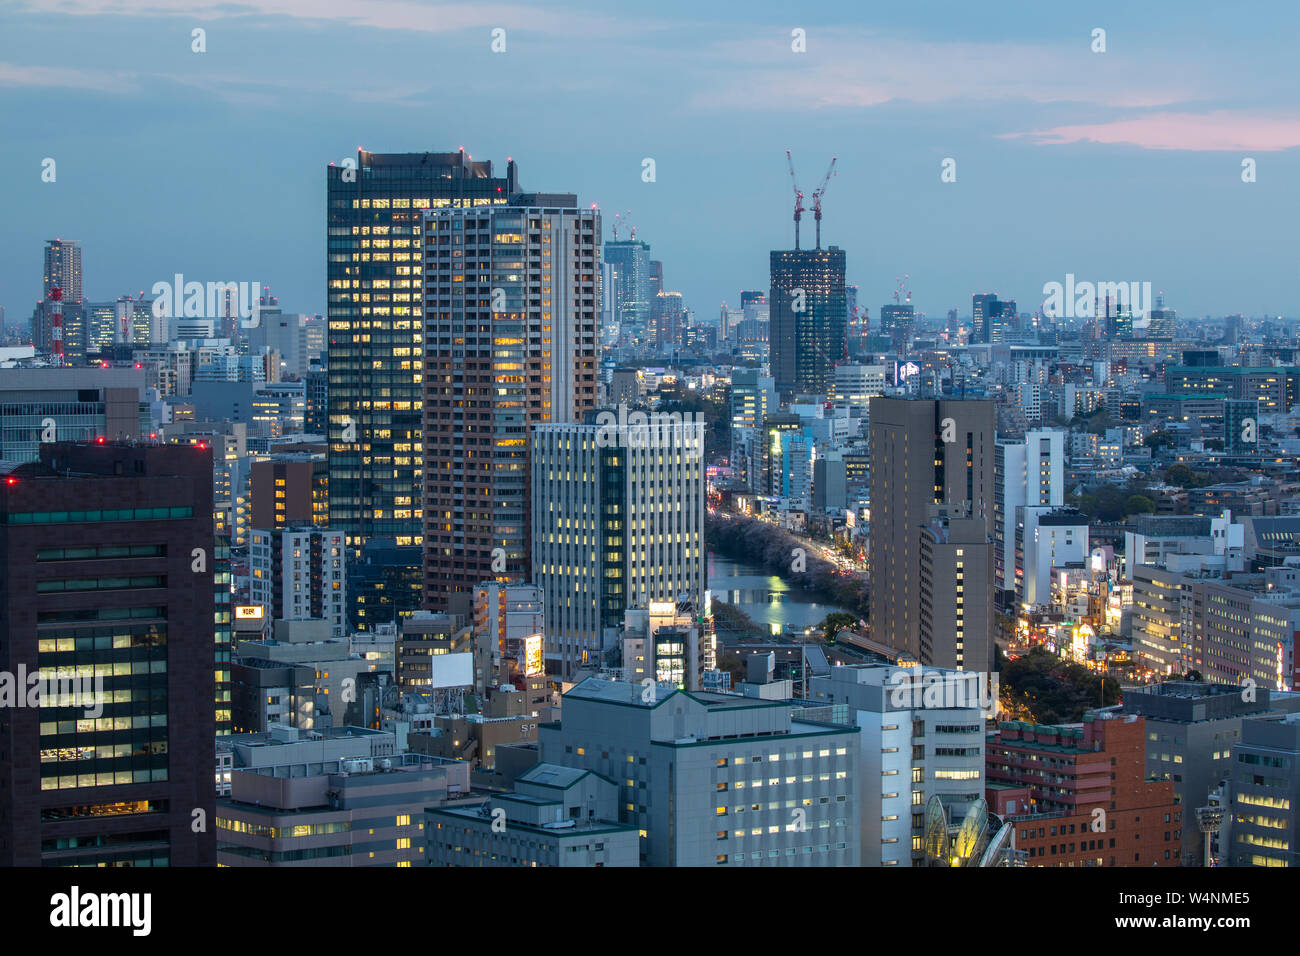 Looking over the Tokyo skyline at sunset, Japan. Stock Photo